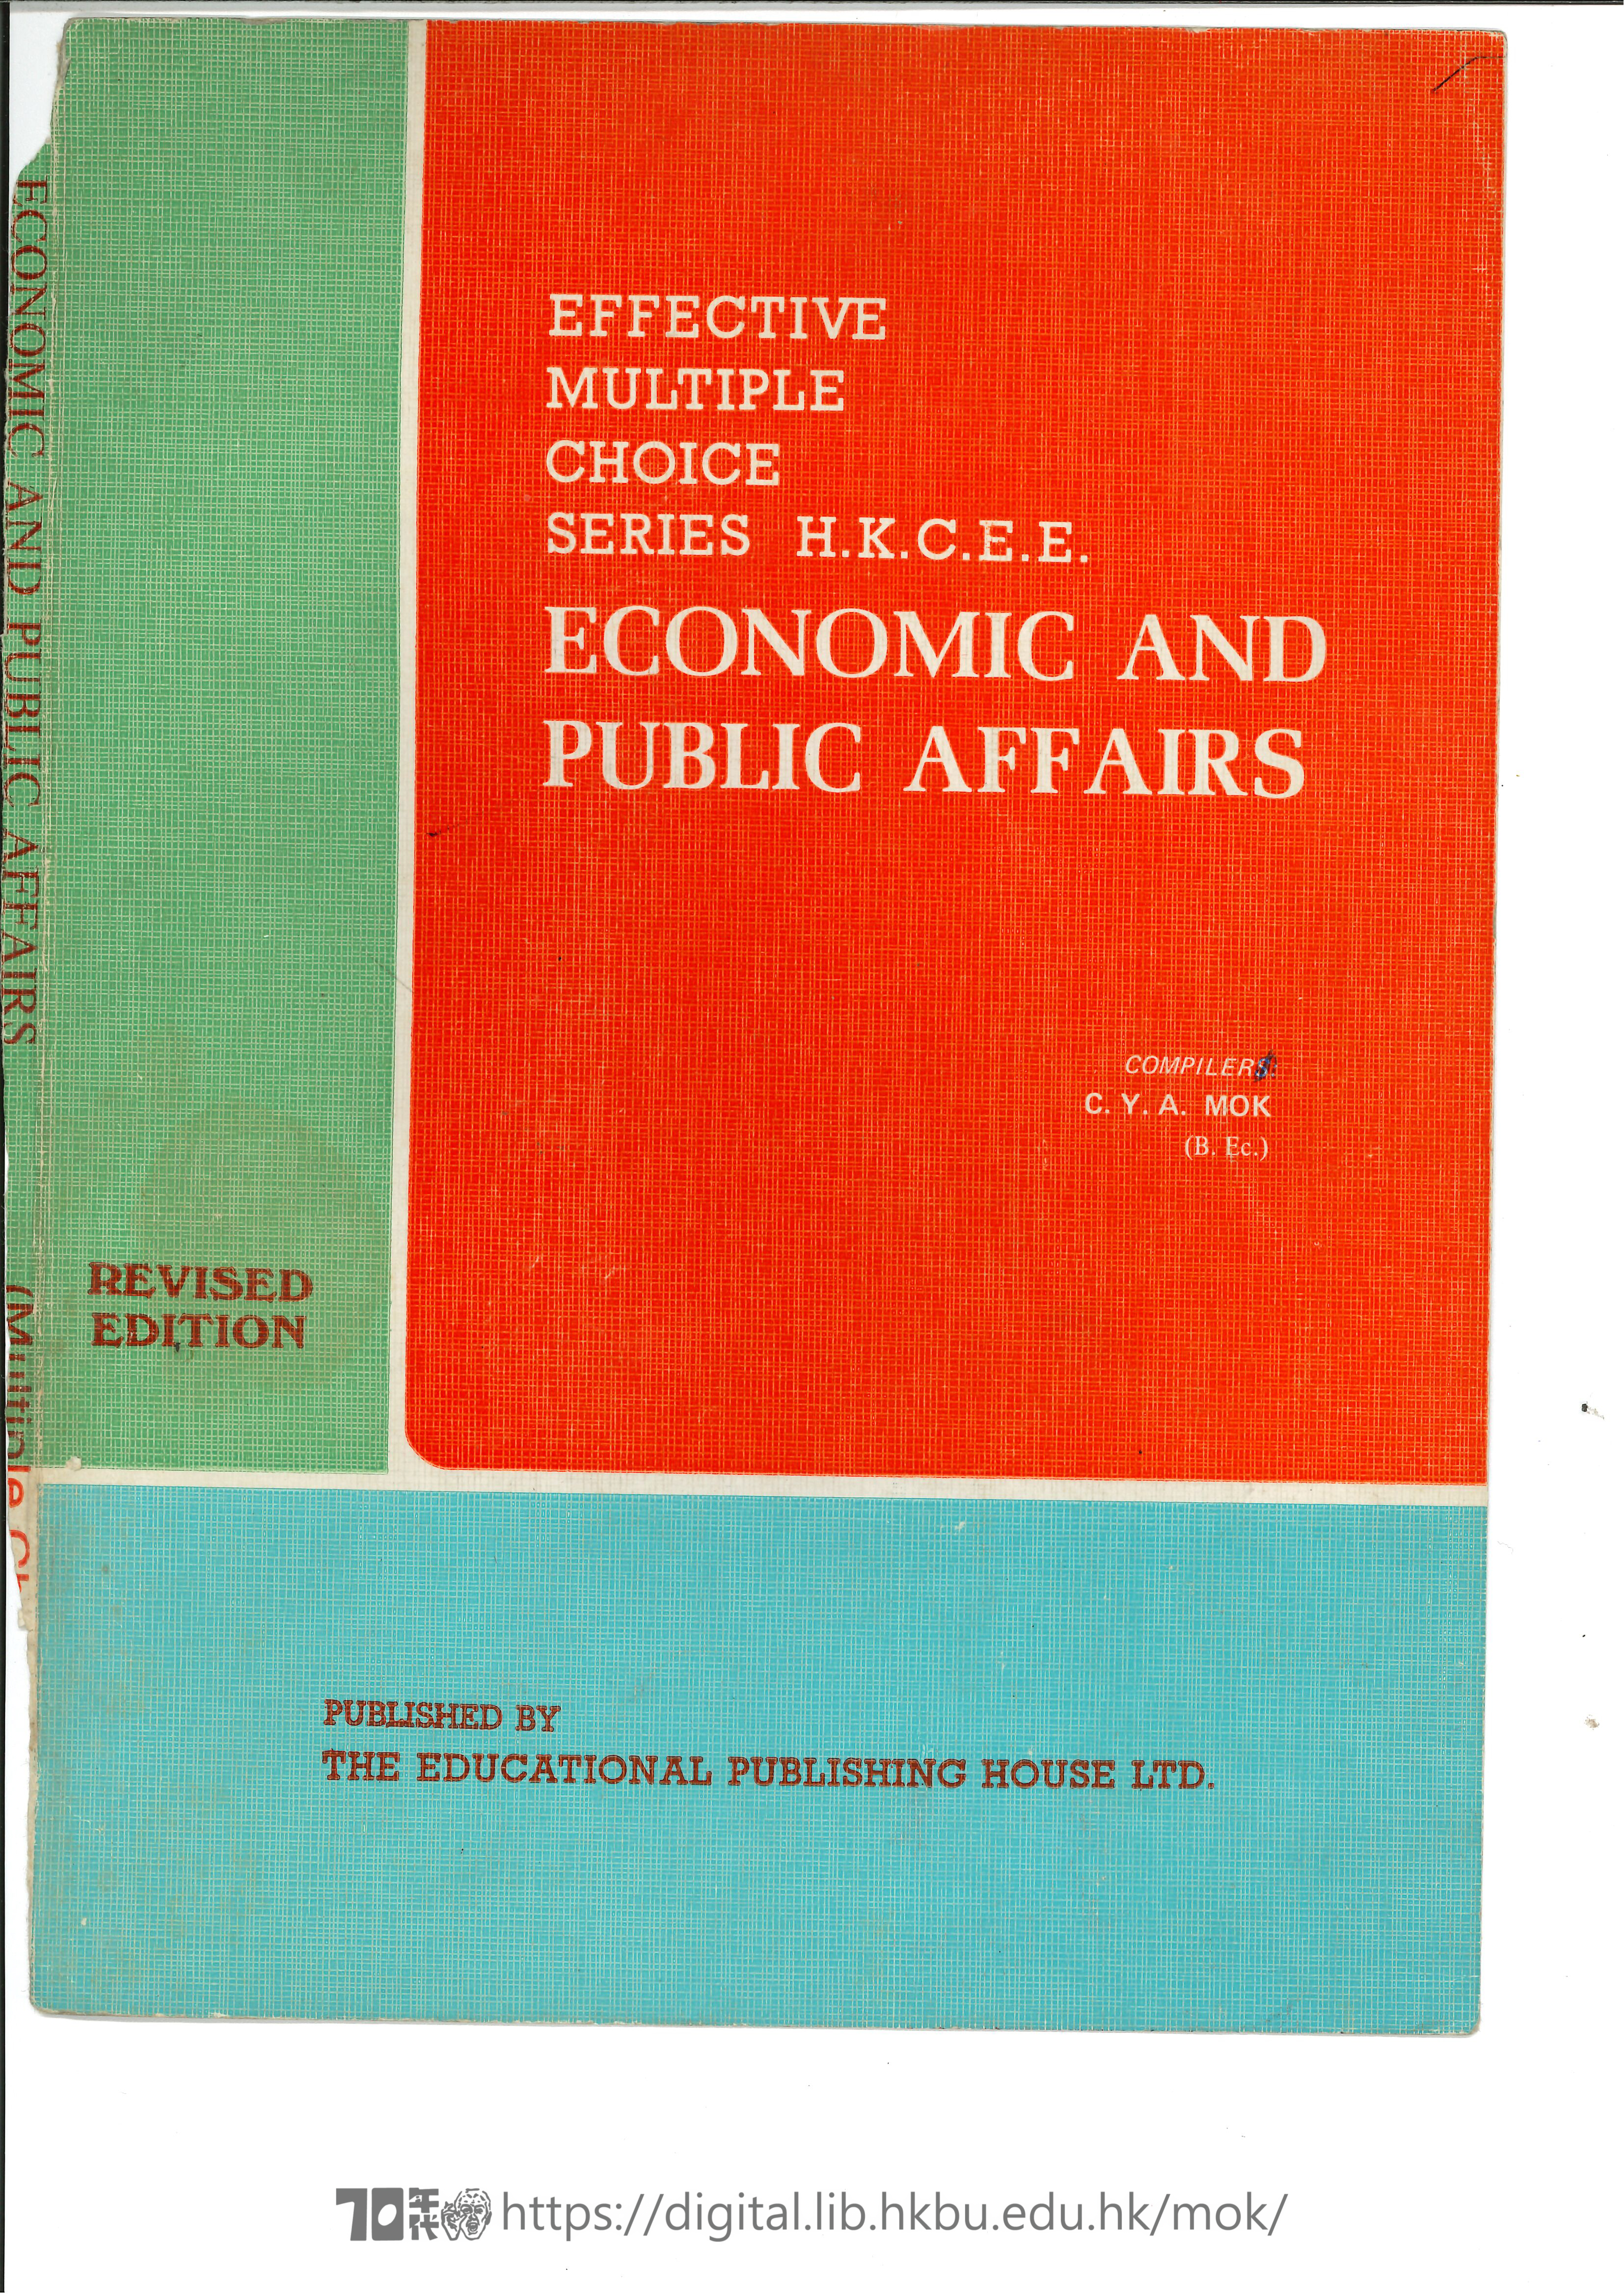   Cover page of book:  Economic and Public Affairs:Effective Multiple Choices Series MOK, Chiu Yu 